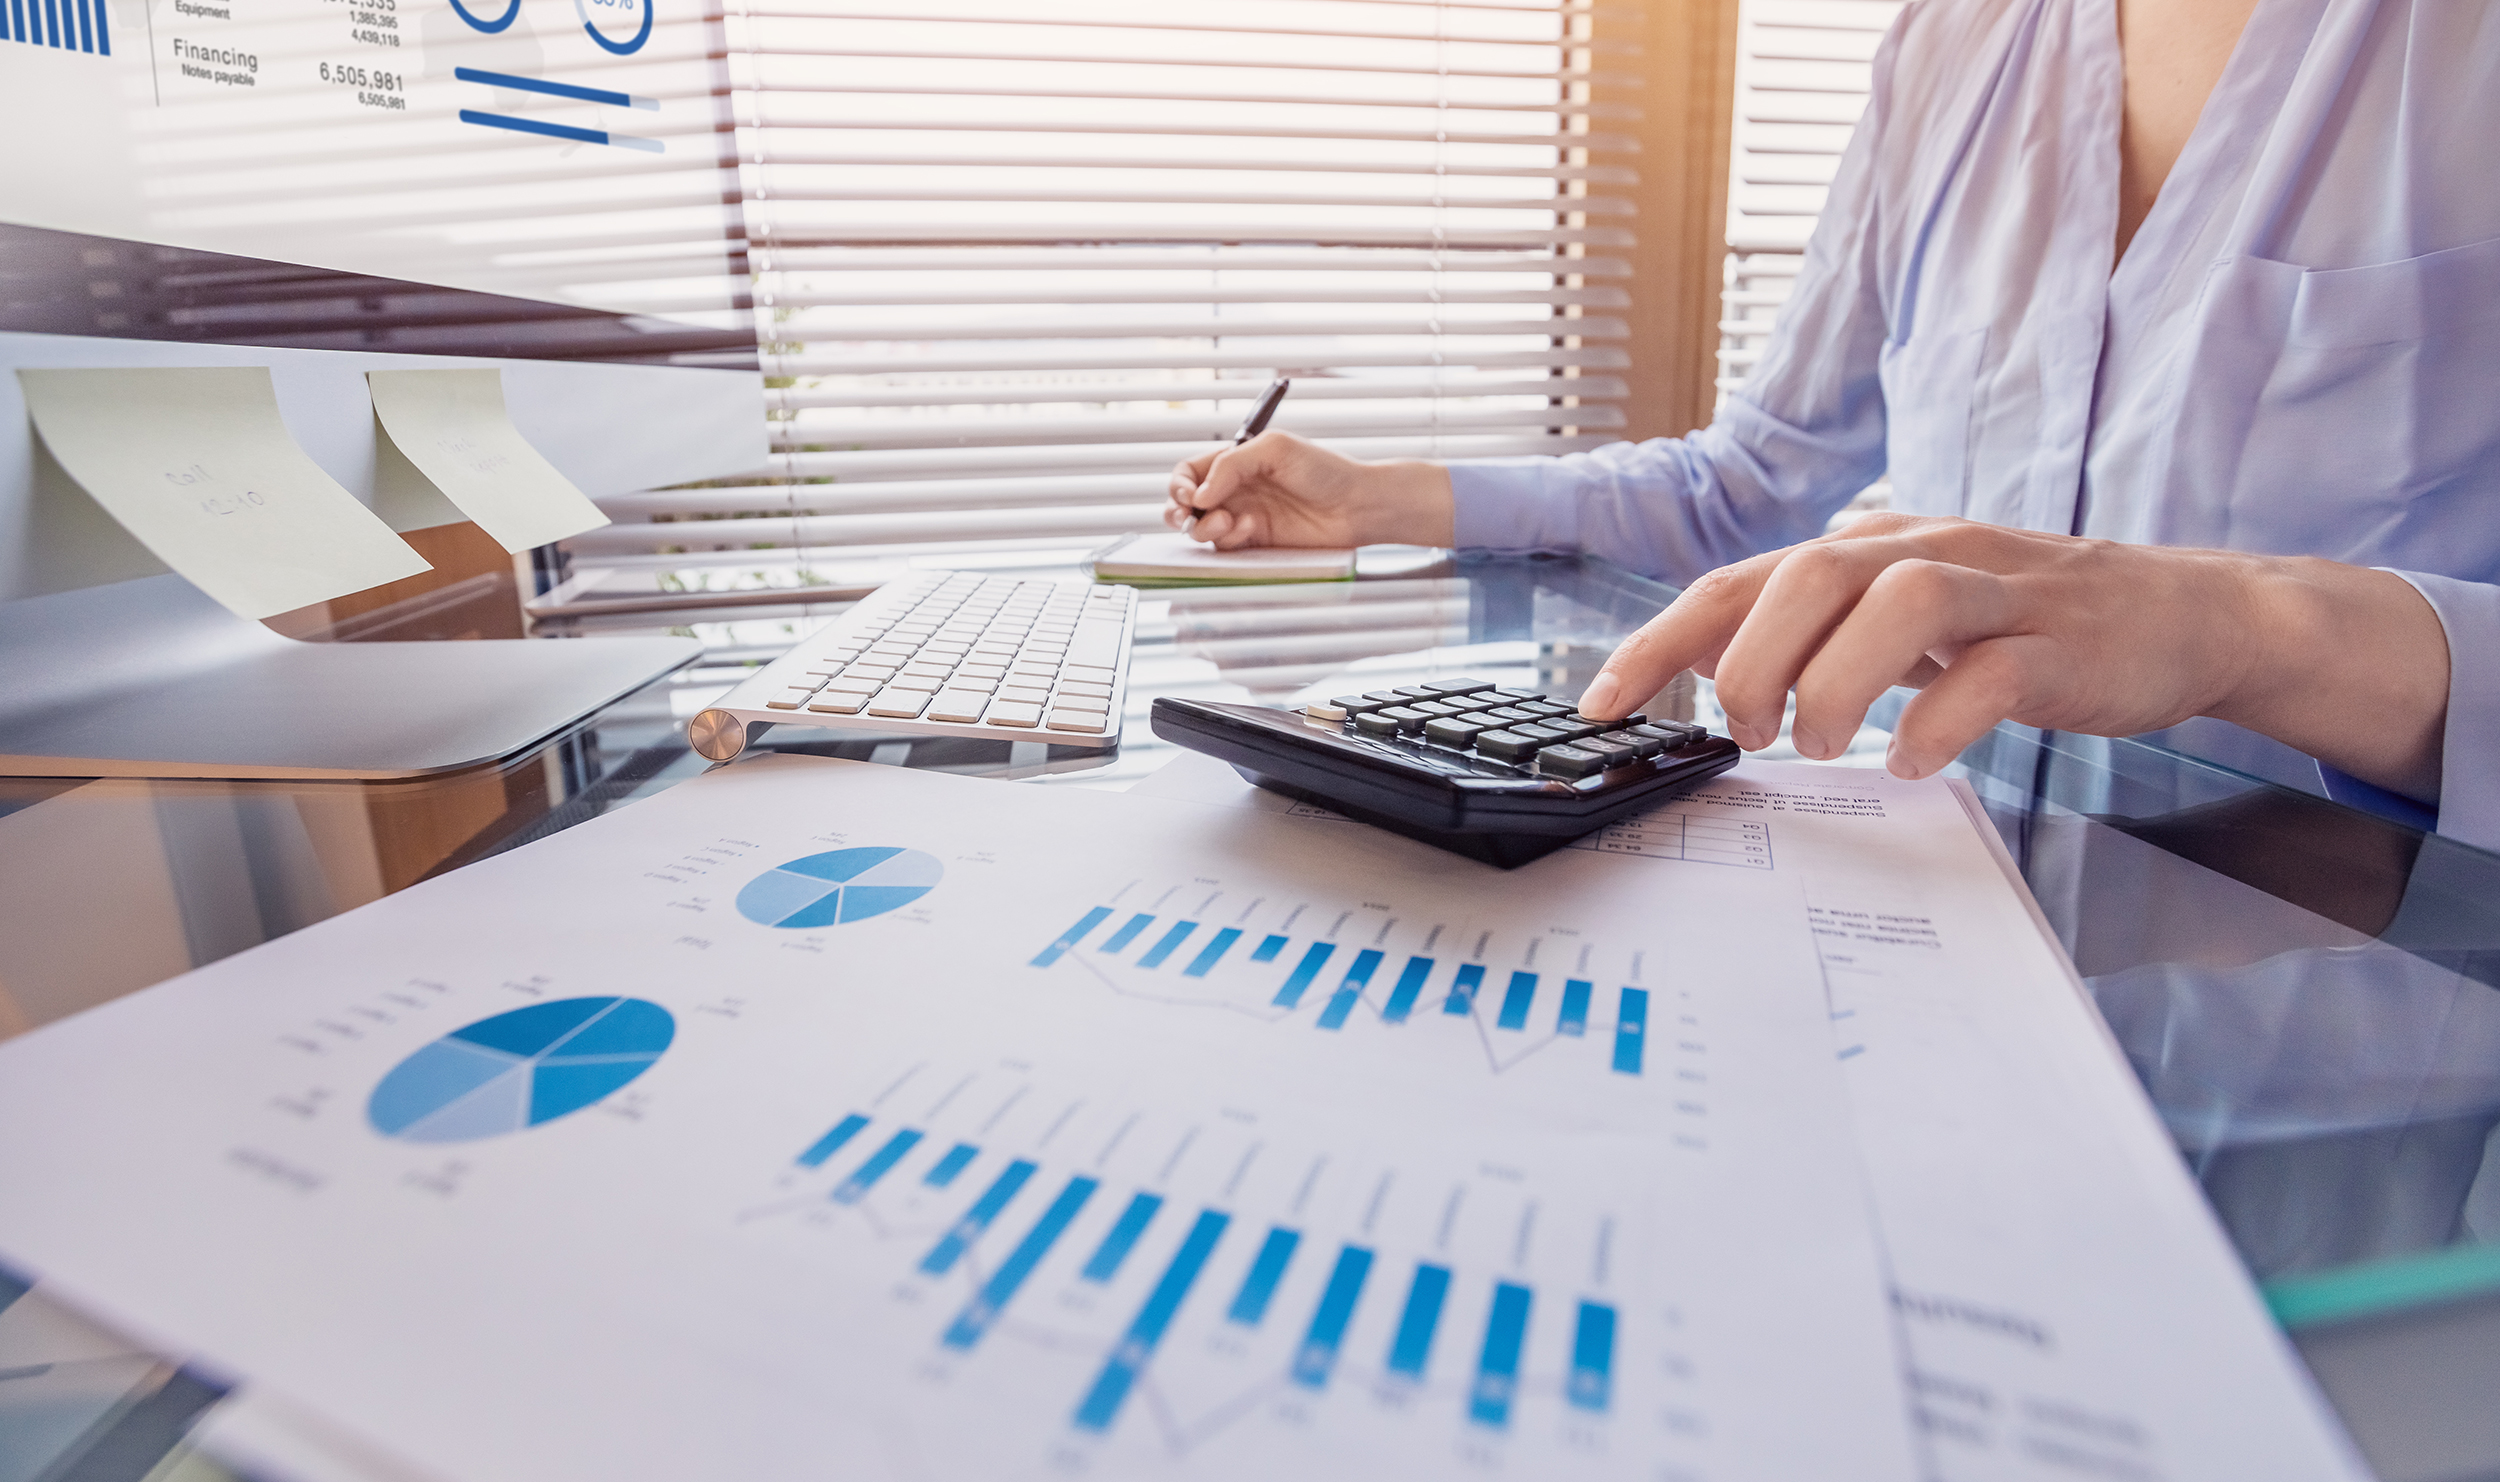 As a part of our dental accounting services in Michigan, financial statements for dentists provide information to help them stay on track all year.